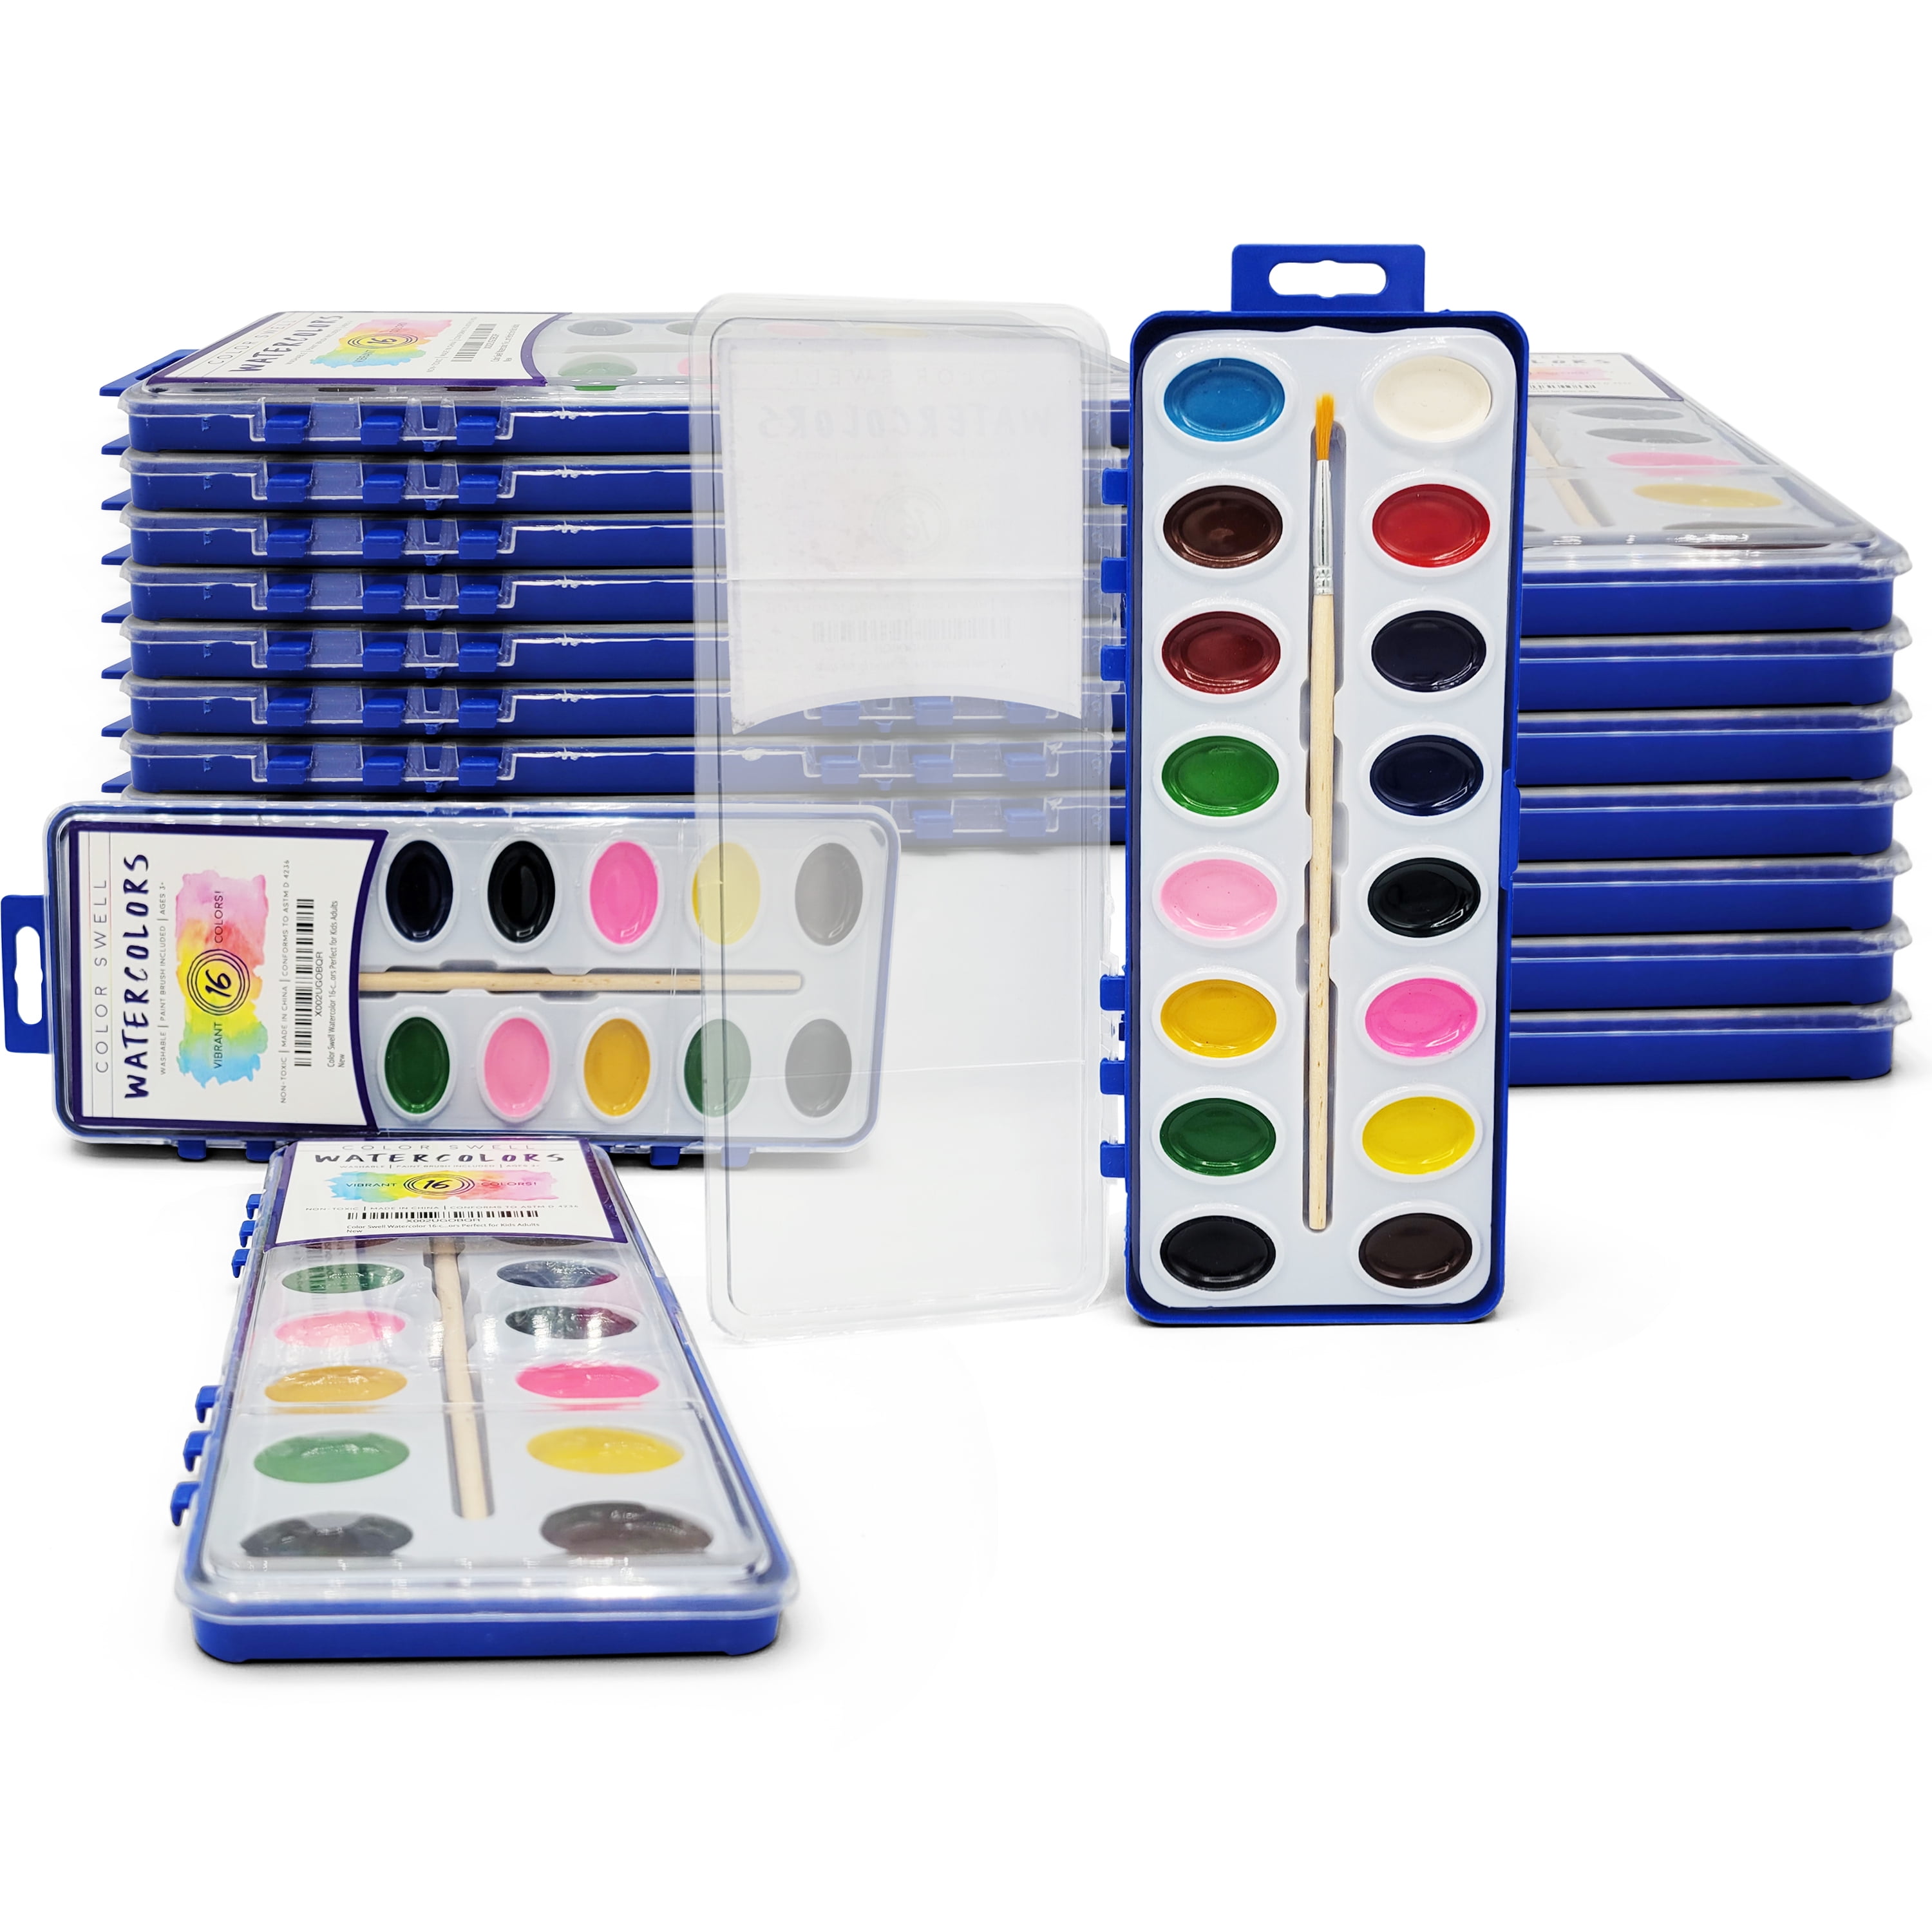 Nicpro Watercolor Paint Set, 48 Water Colors Kit with 3 Squirrel Brush